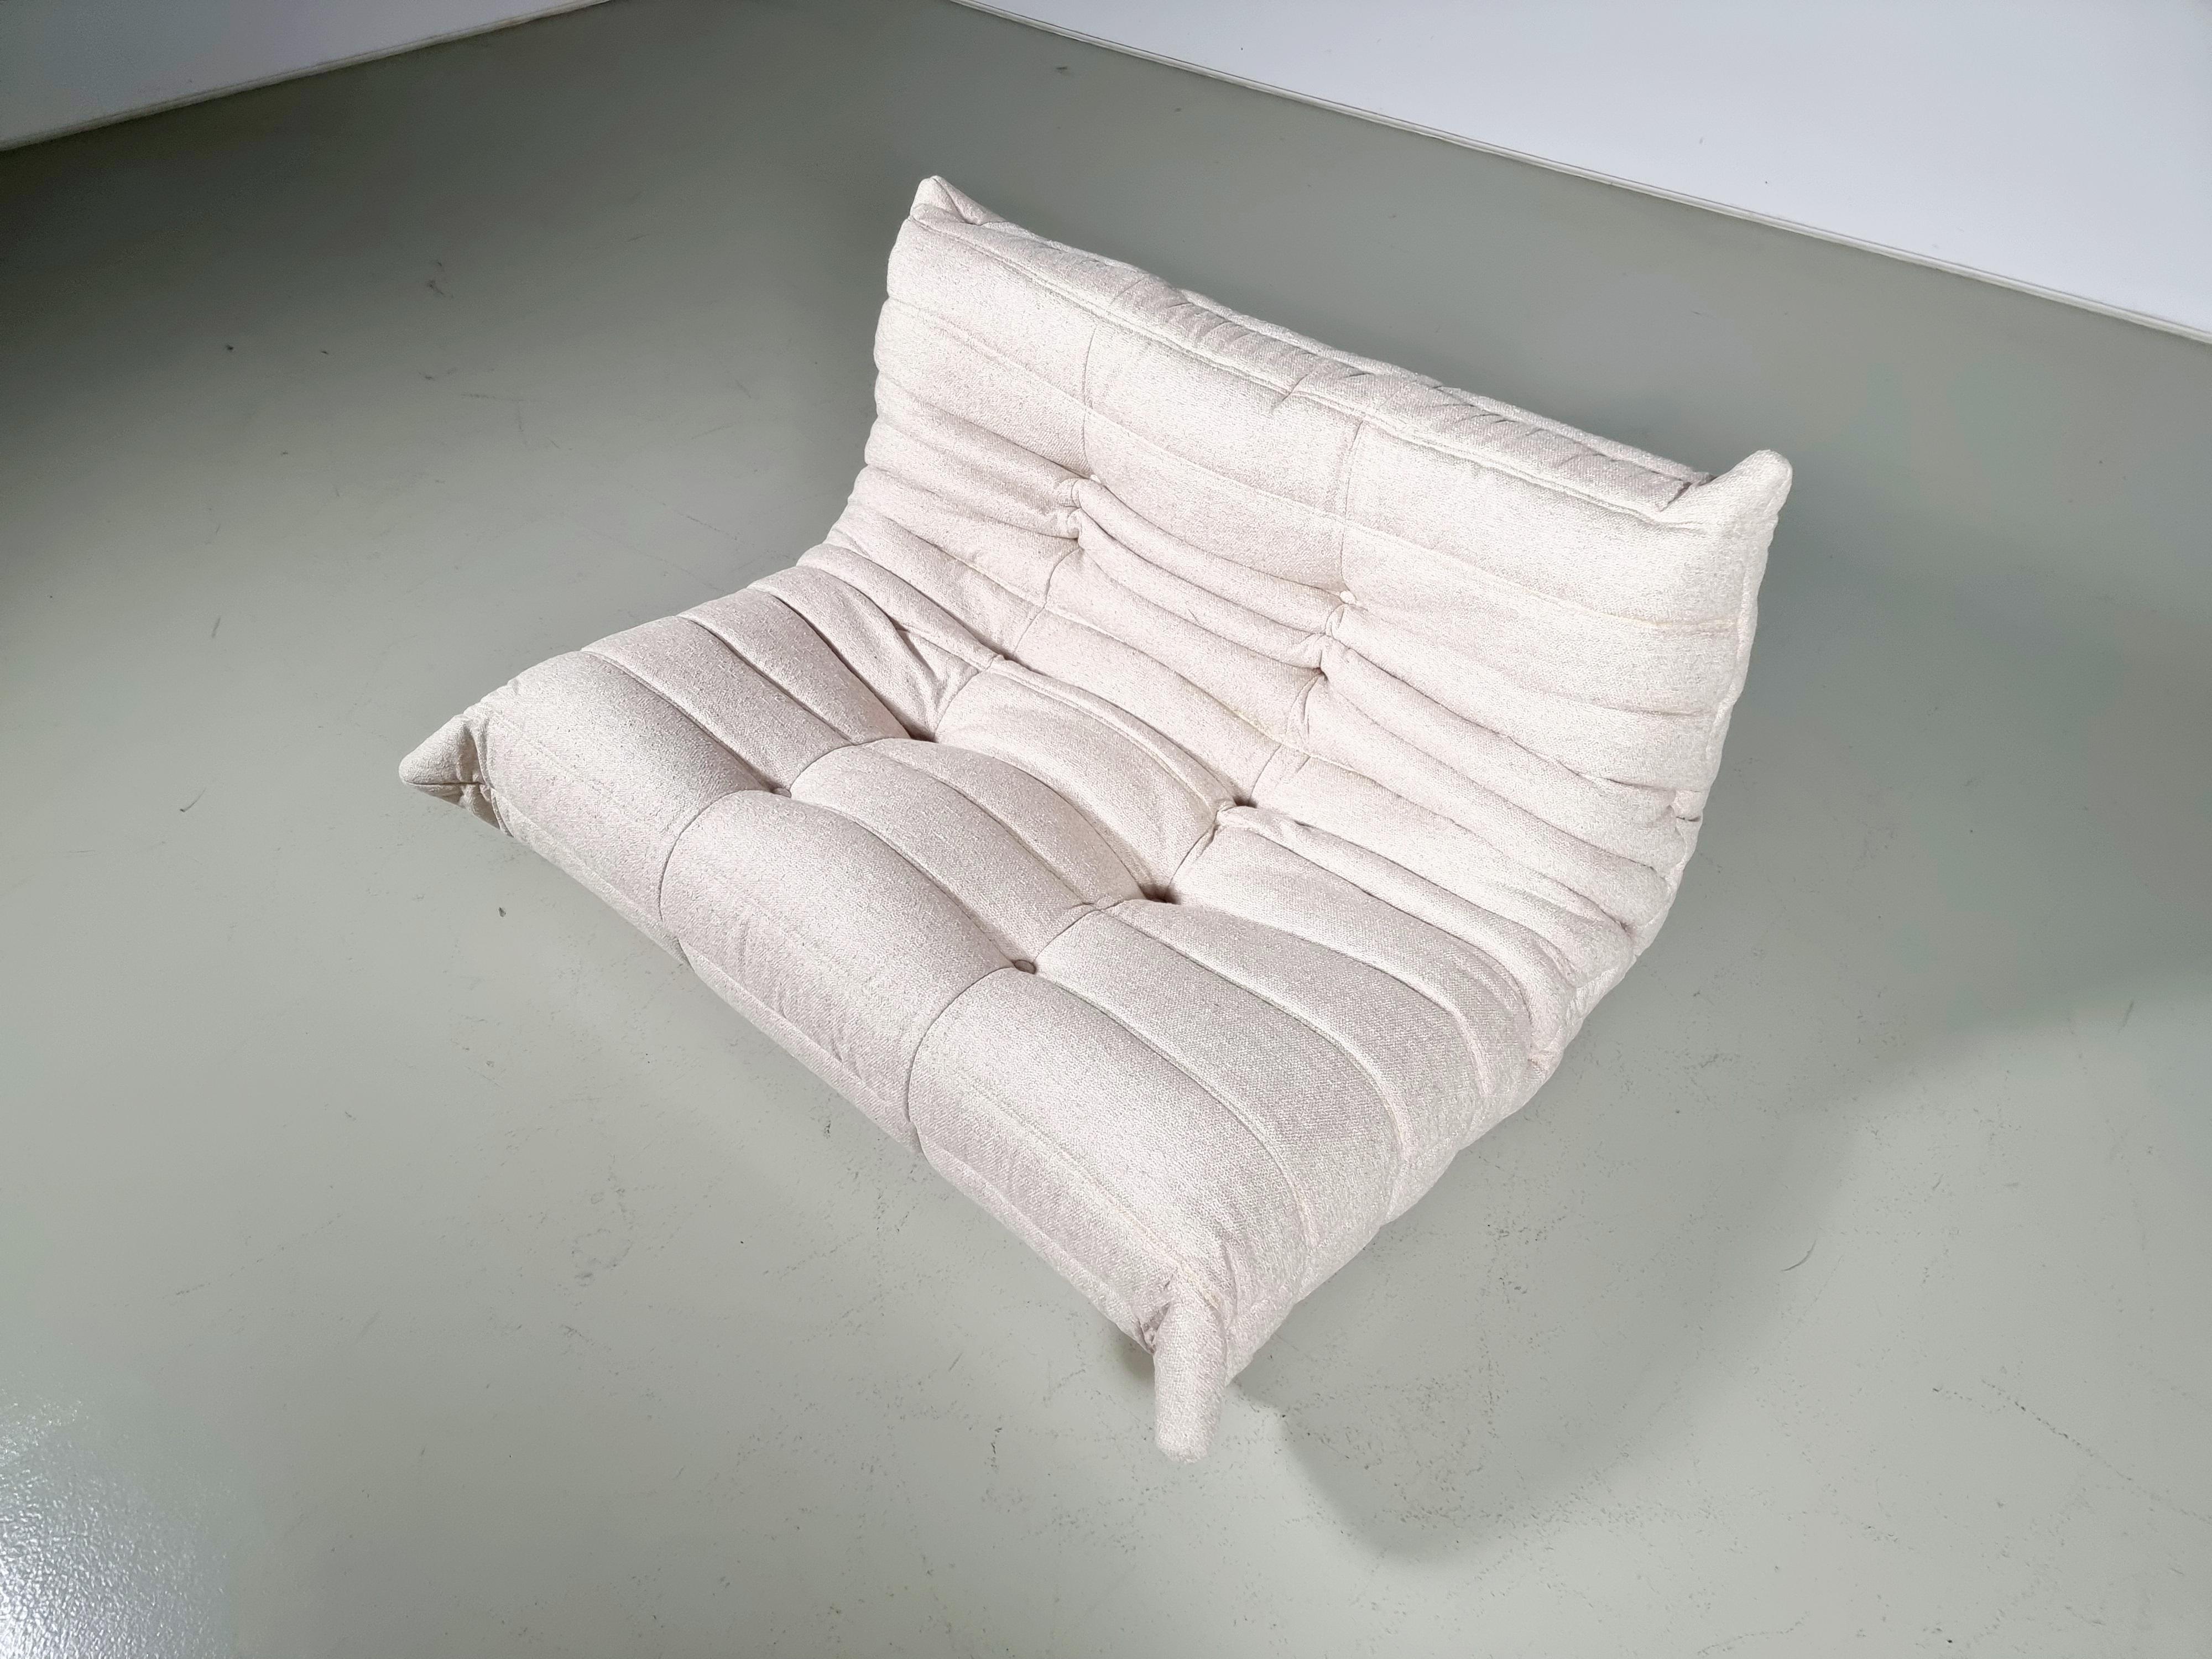 European Togo 2-Seater Sofa in cream fabric by Michel Ducaroy for Ligne Roset, 1970s For Sale